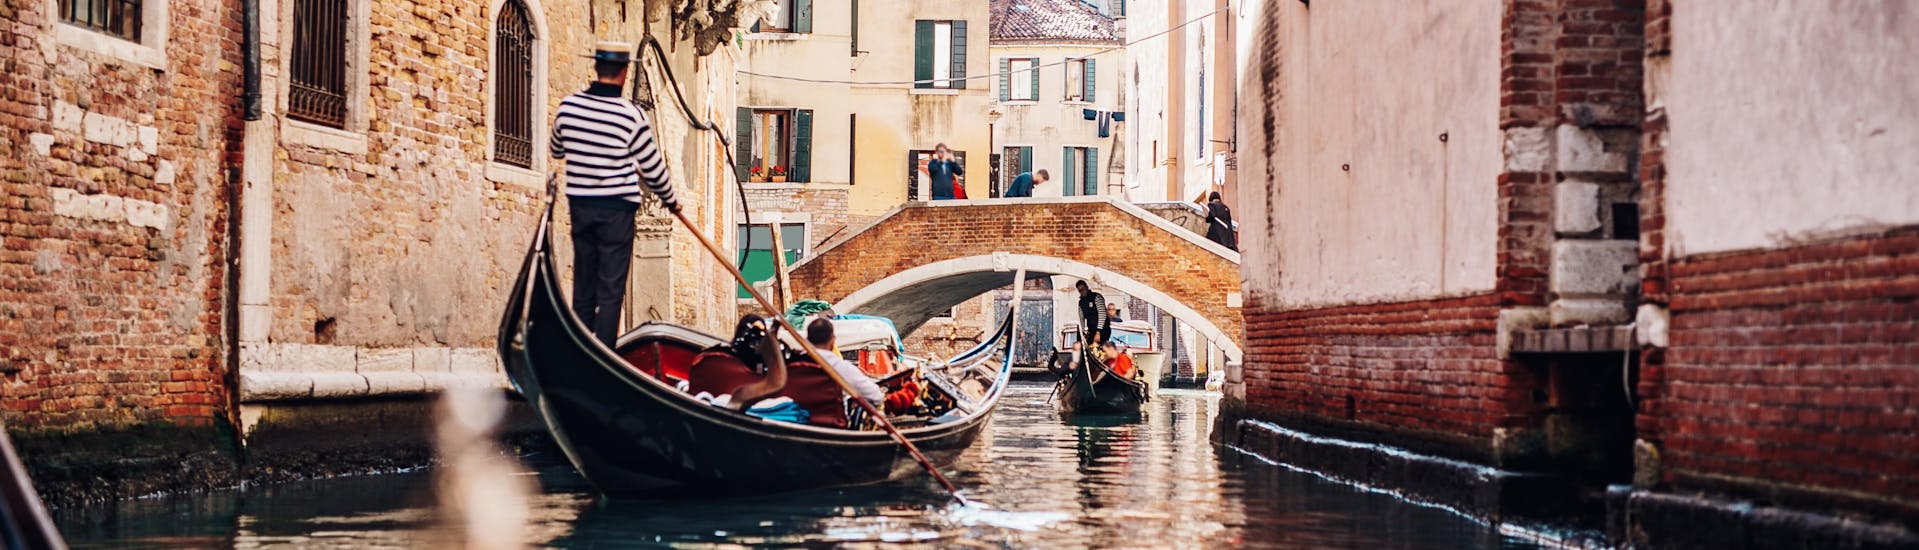 People enjoy a relaxing gondola ride through the canals.